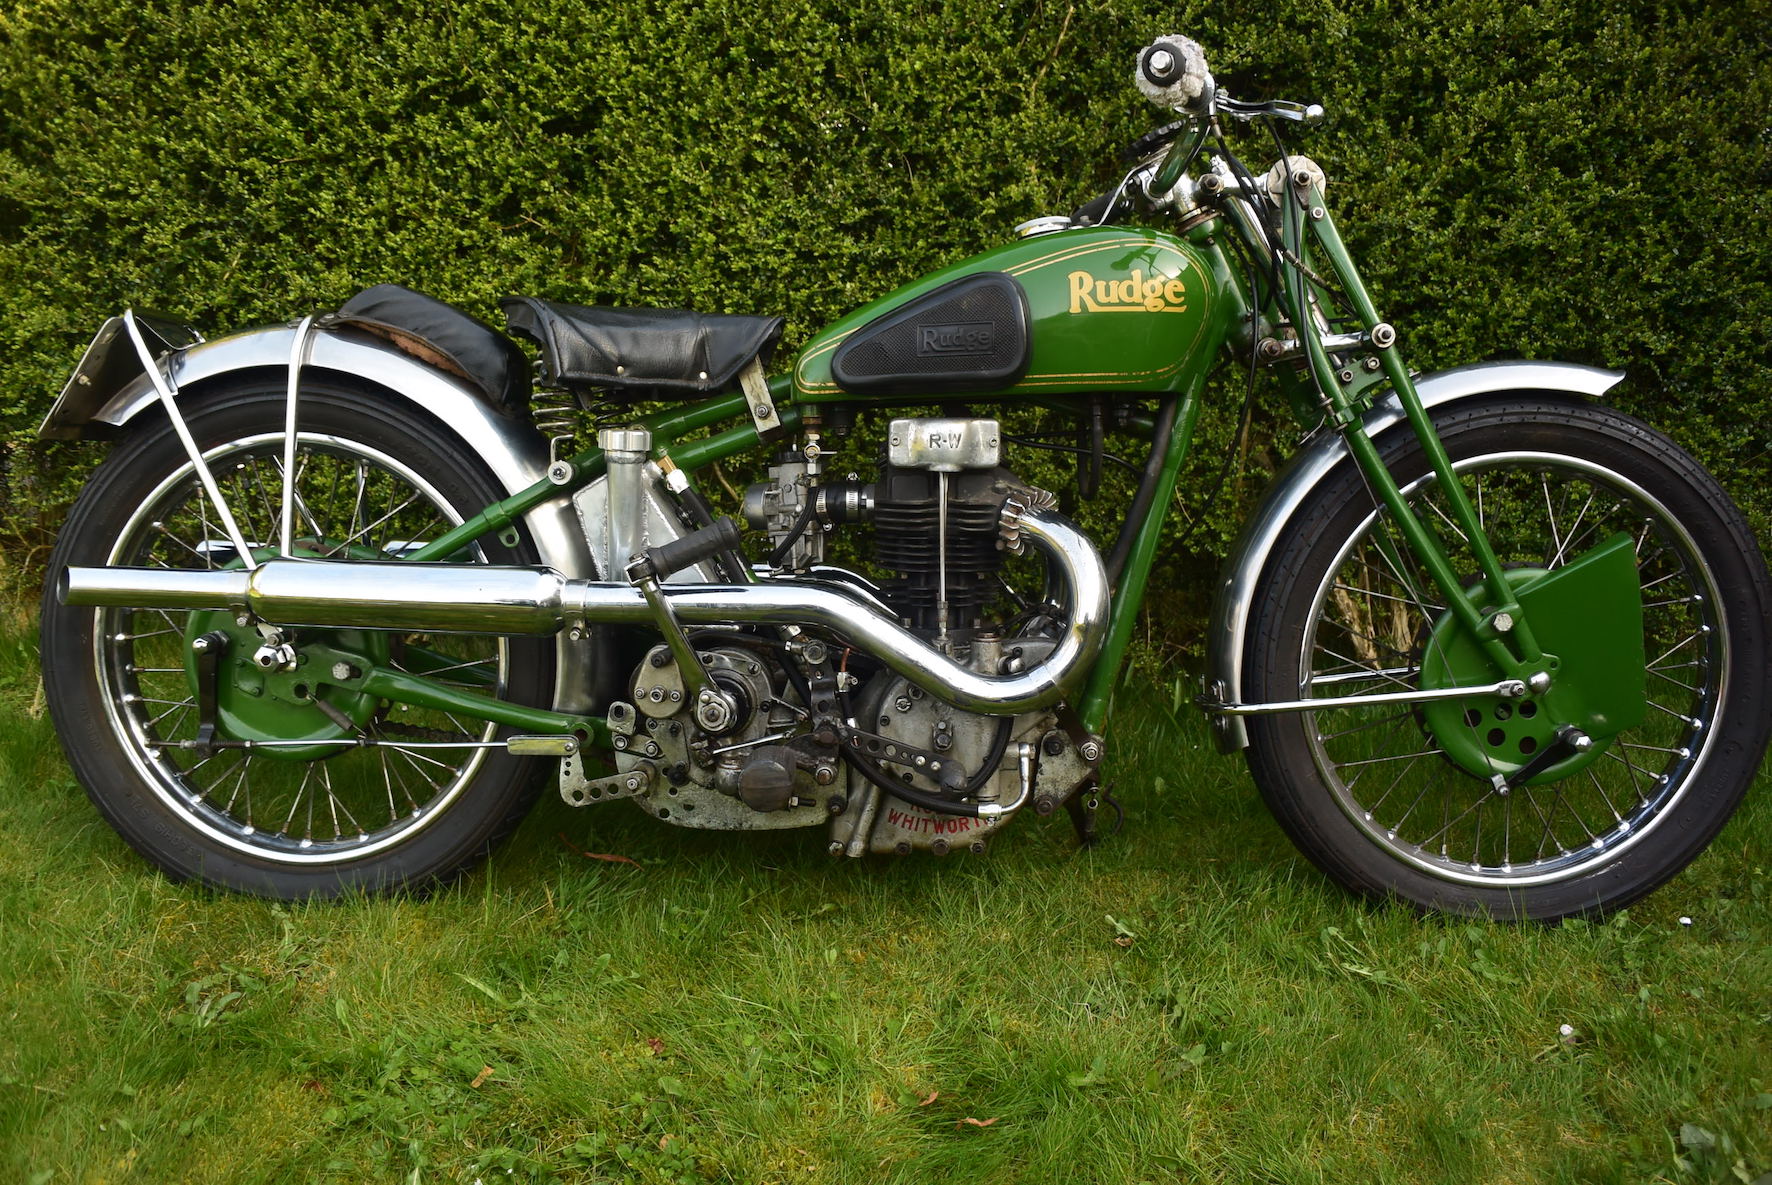 1934 Rudge Ulster Motorcycle